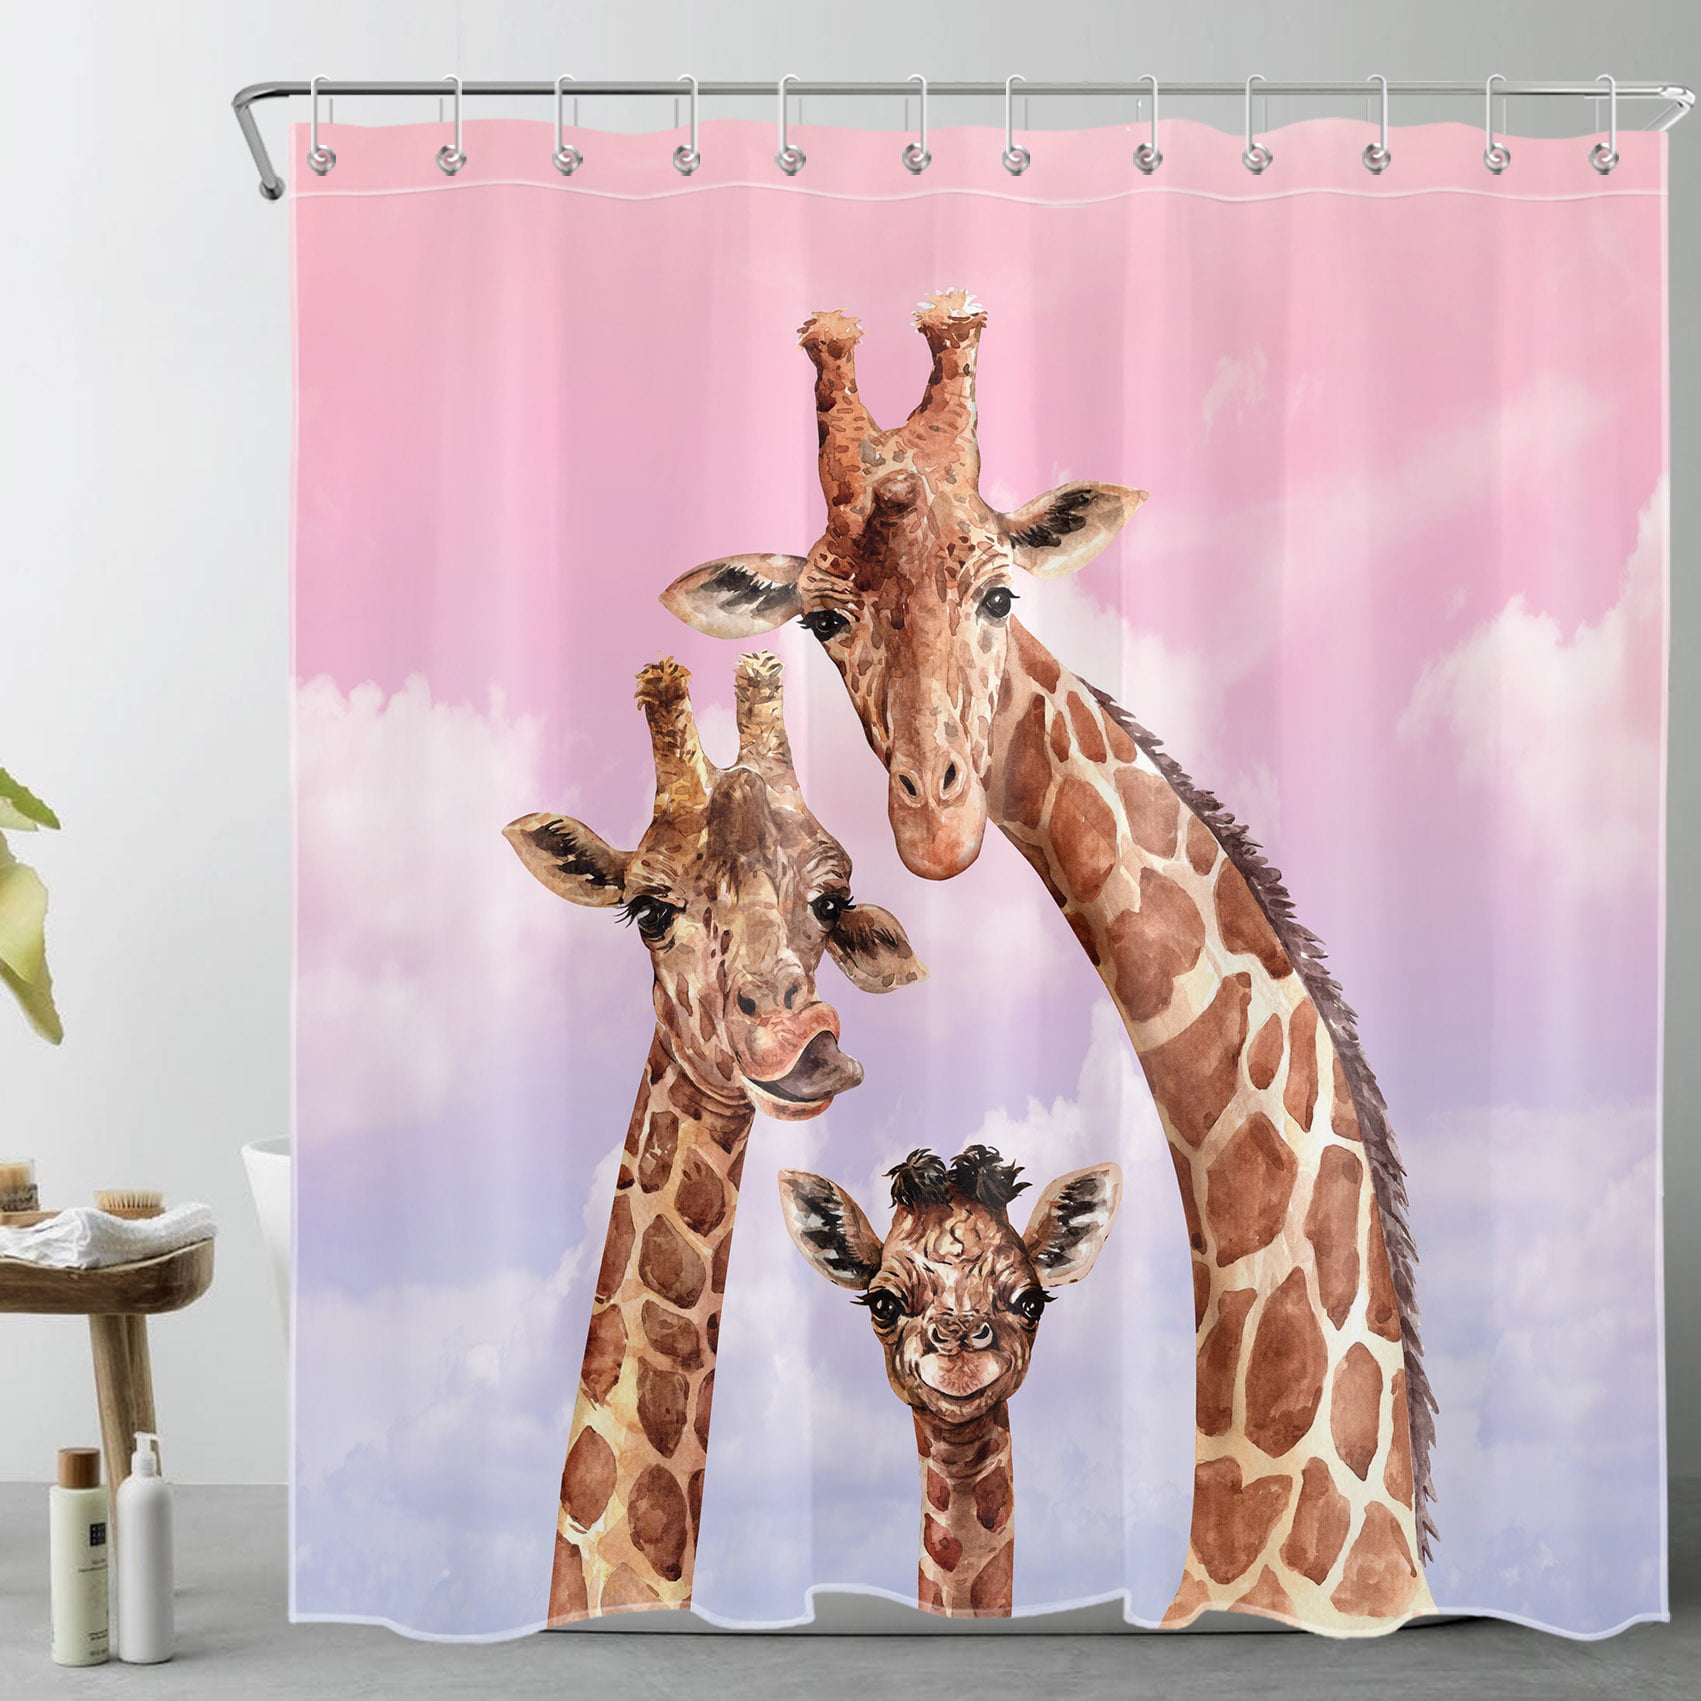 HVEST Wild Animal Giraffe Shower Curtain Decor, Pink Purple Sky White Cloud  Funny Animal Shower Curtains for Bathroom 72X78 inch Polyester Fabric  Bathroom Decoration Bath Curtains Hooks Included 